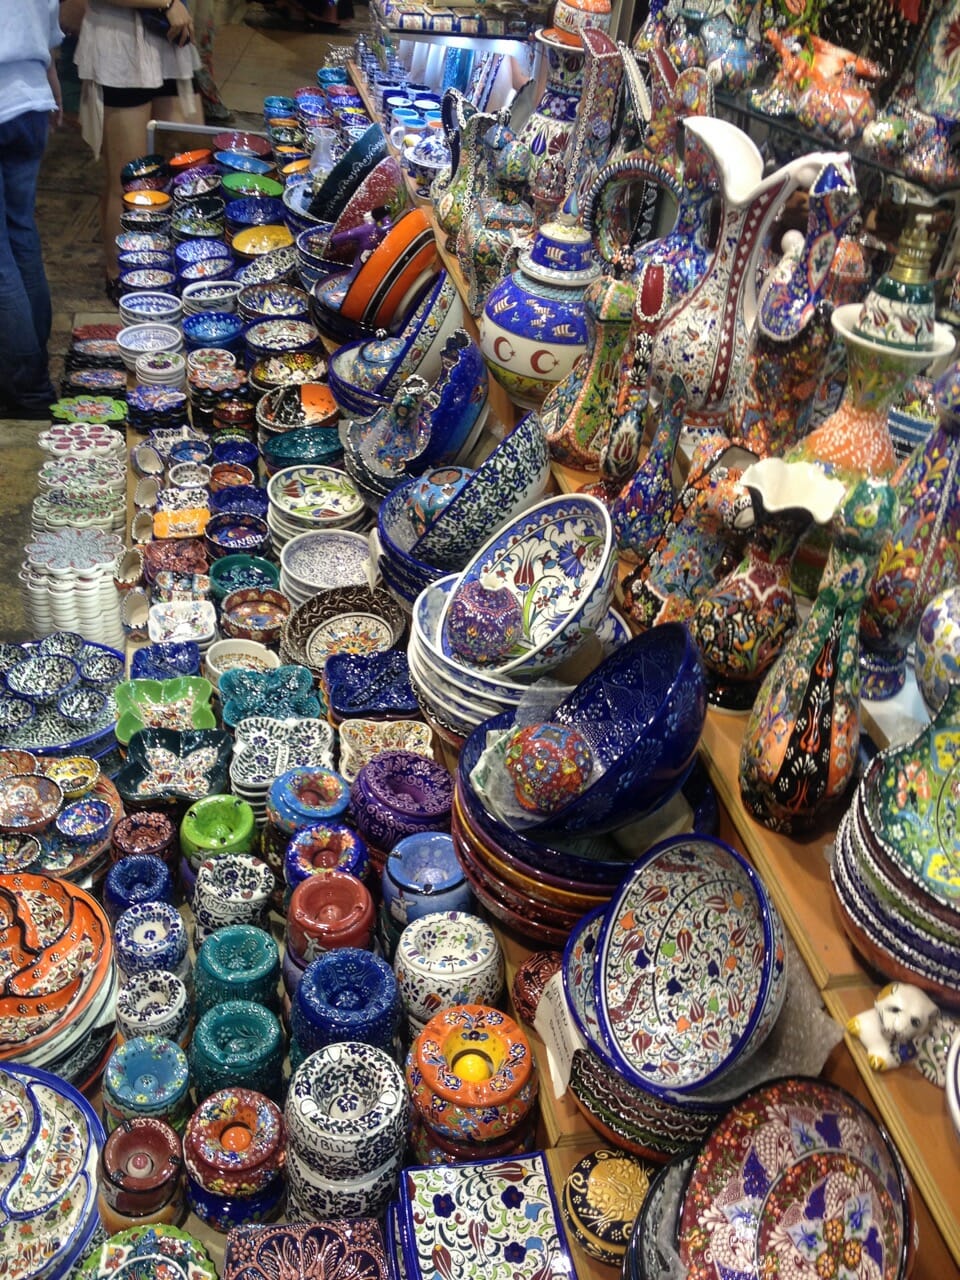 Colourful porcelain bowls an plates sold at the Grand Bazaar, Istanbul